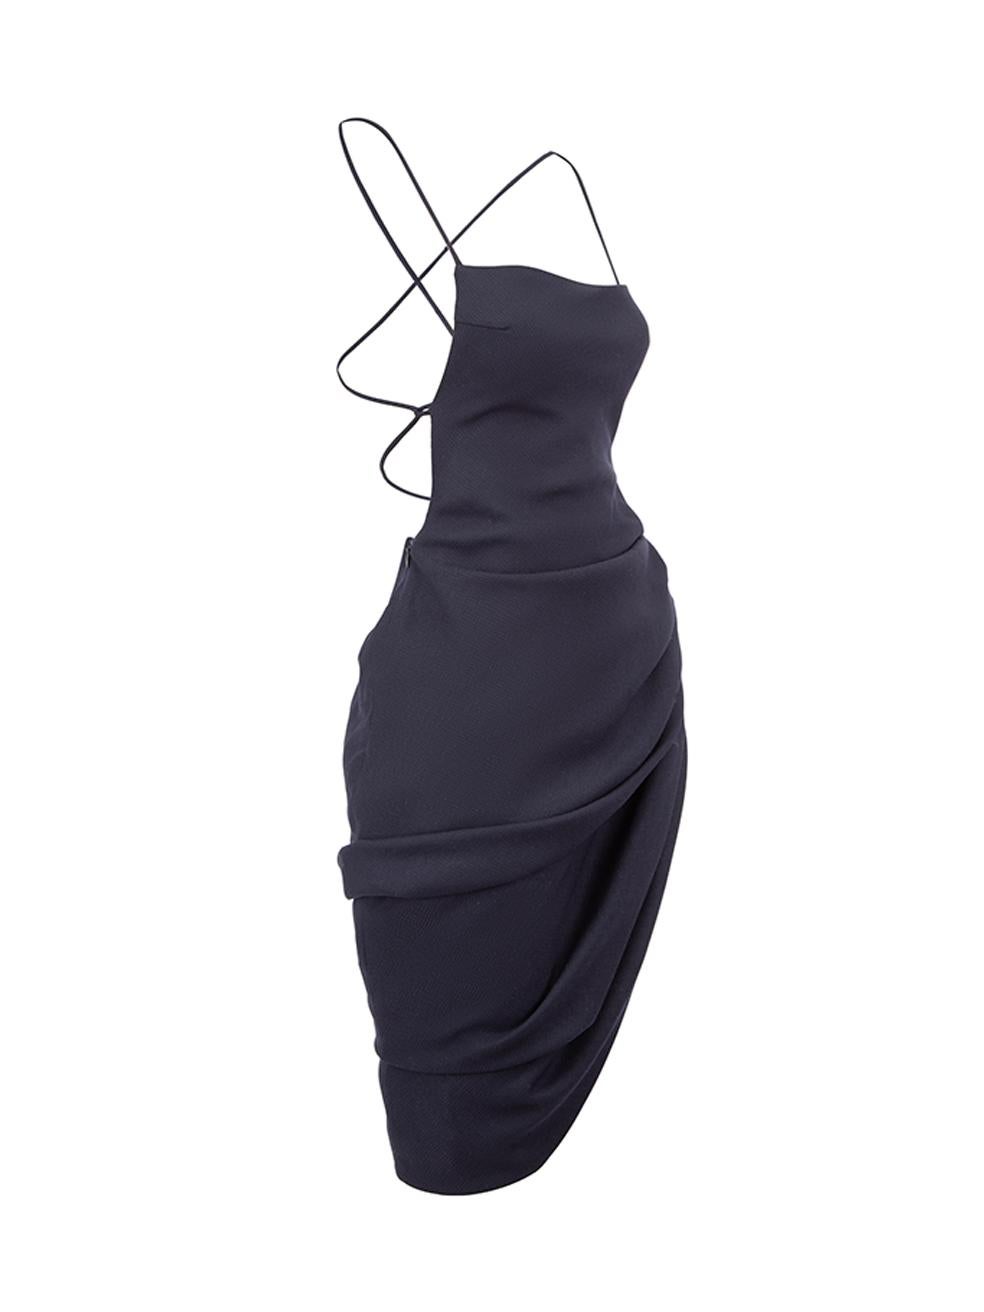 CONDITION is Very good. Hardly any visible wear to dress is evident, however eye fastening is missing at top of side zip on this used Jacquemus designer resale item. 



Details


Navy

Wool

Knee length dress

Ruched drape design

Strappy open